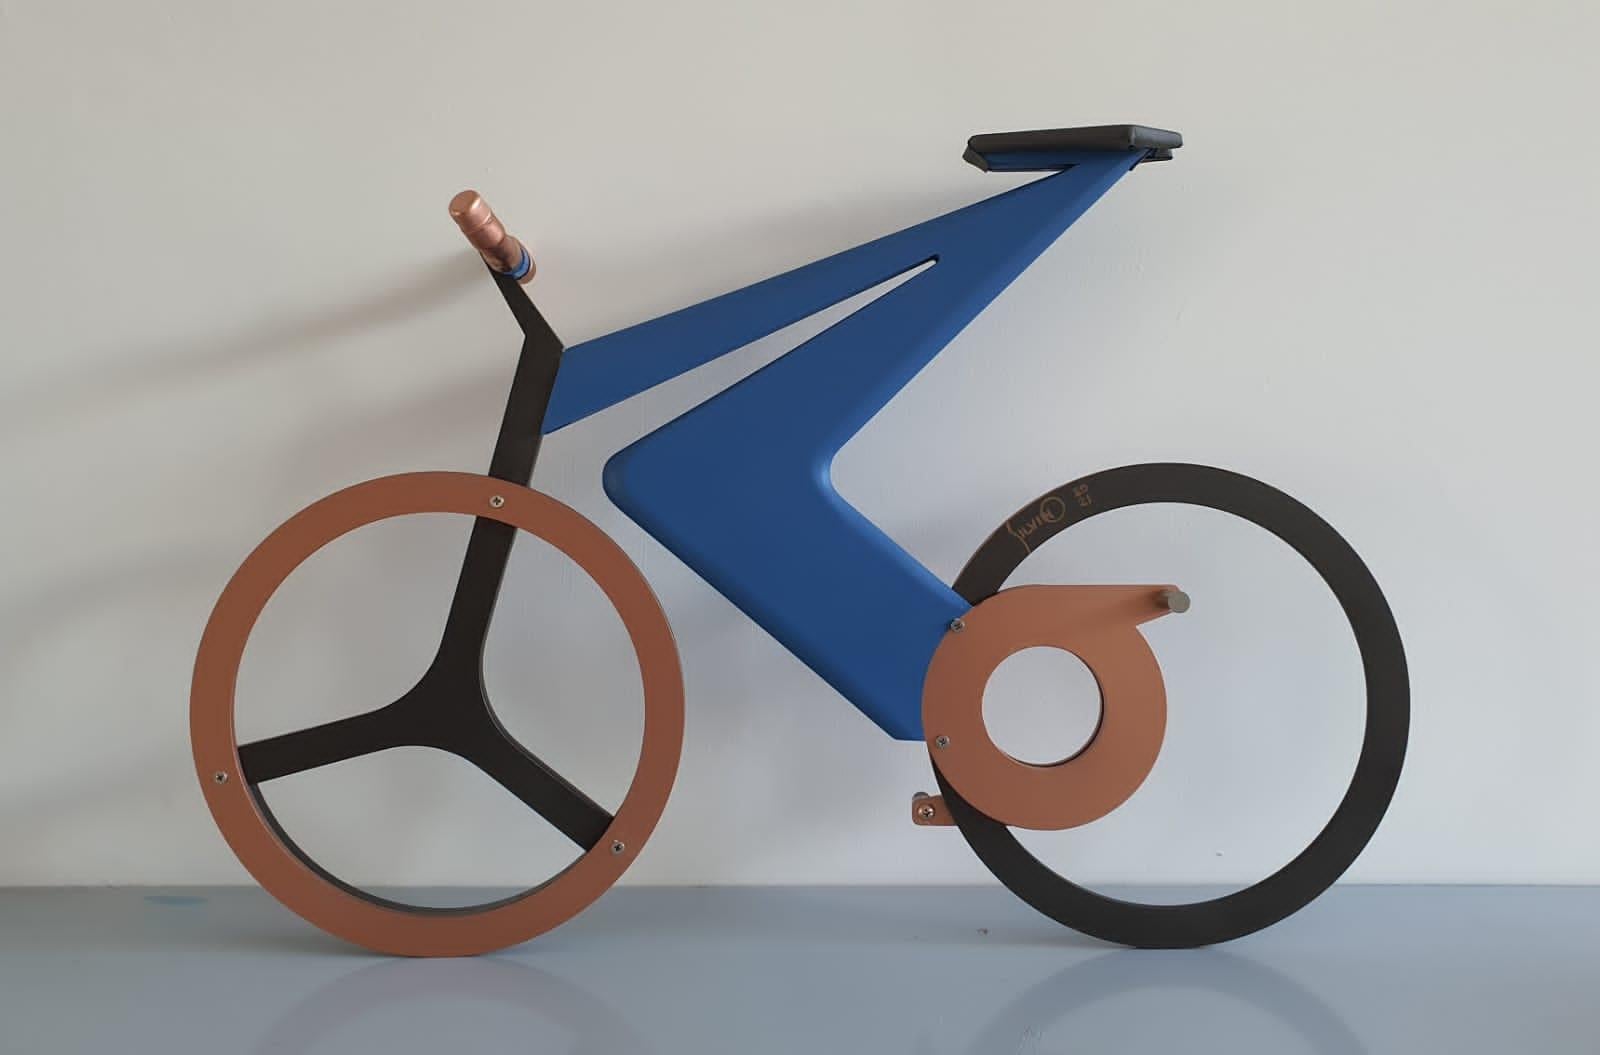 Silvino has designed a series of bicycles which has turned them into wall sculptures. Each of the bikes is different, either in model or color.

Silvino Lopeztovar
Born in Tlahuelilpan, Hidalgo, Mexico in 1970, Silvino Lopeztovar finished his